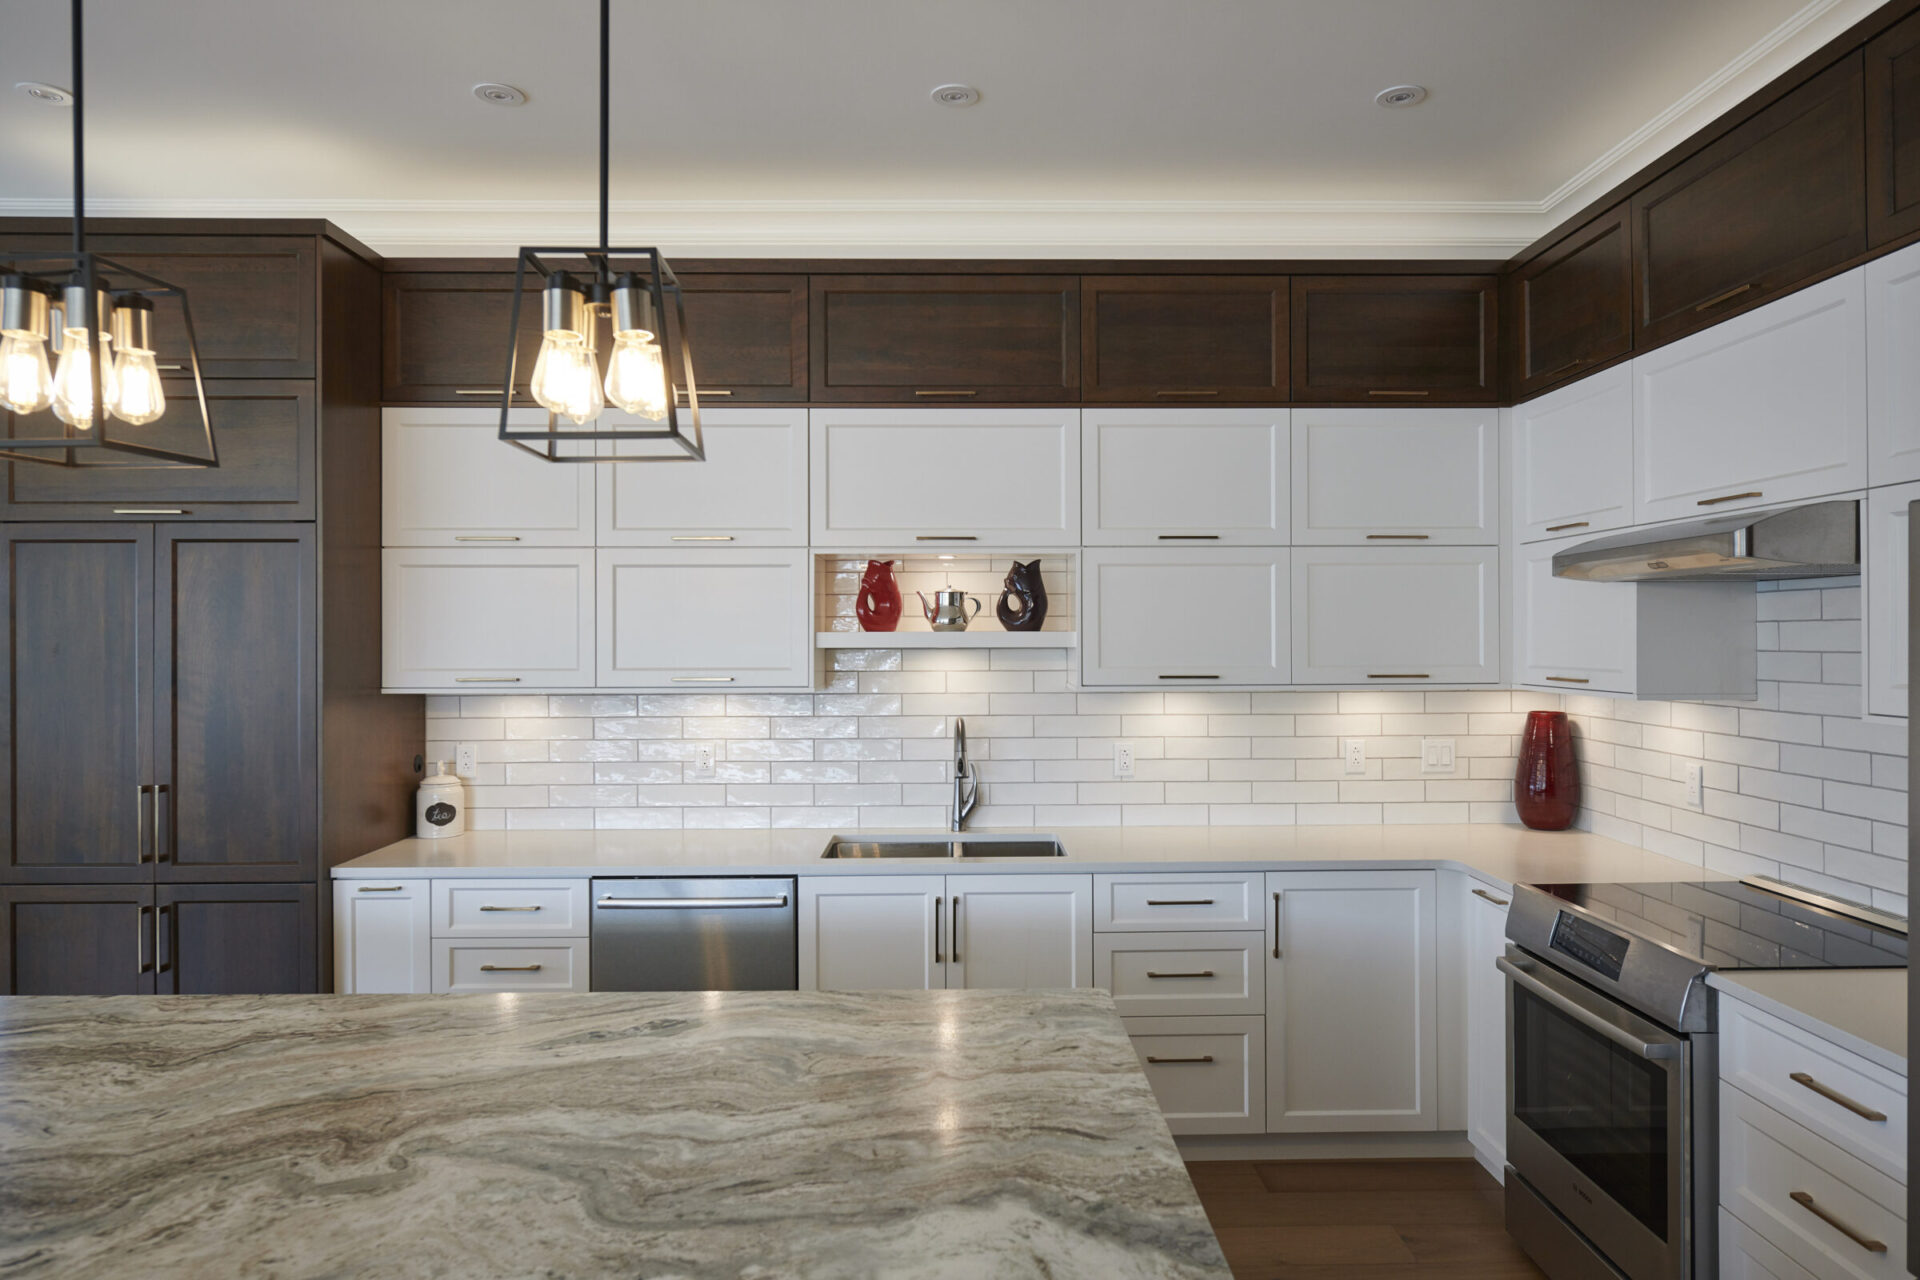 A modern kitchen with white cabinets, stainless steel appliances, dark wood accents, pendant lights, and a marbled countertop island in the foreground.